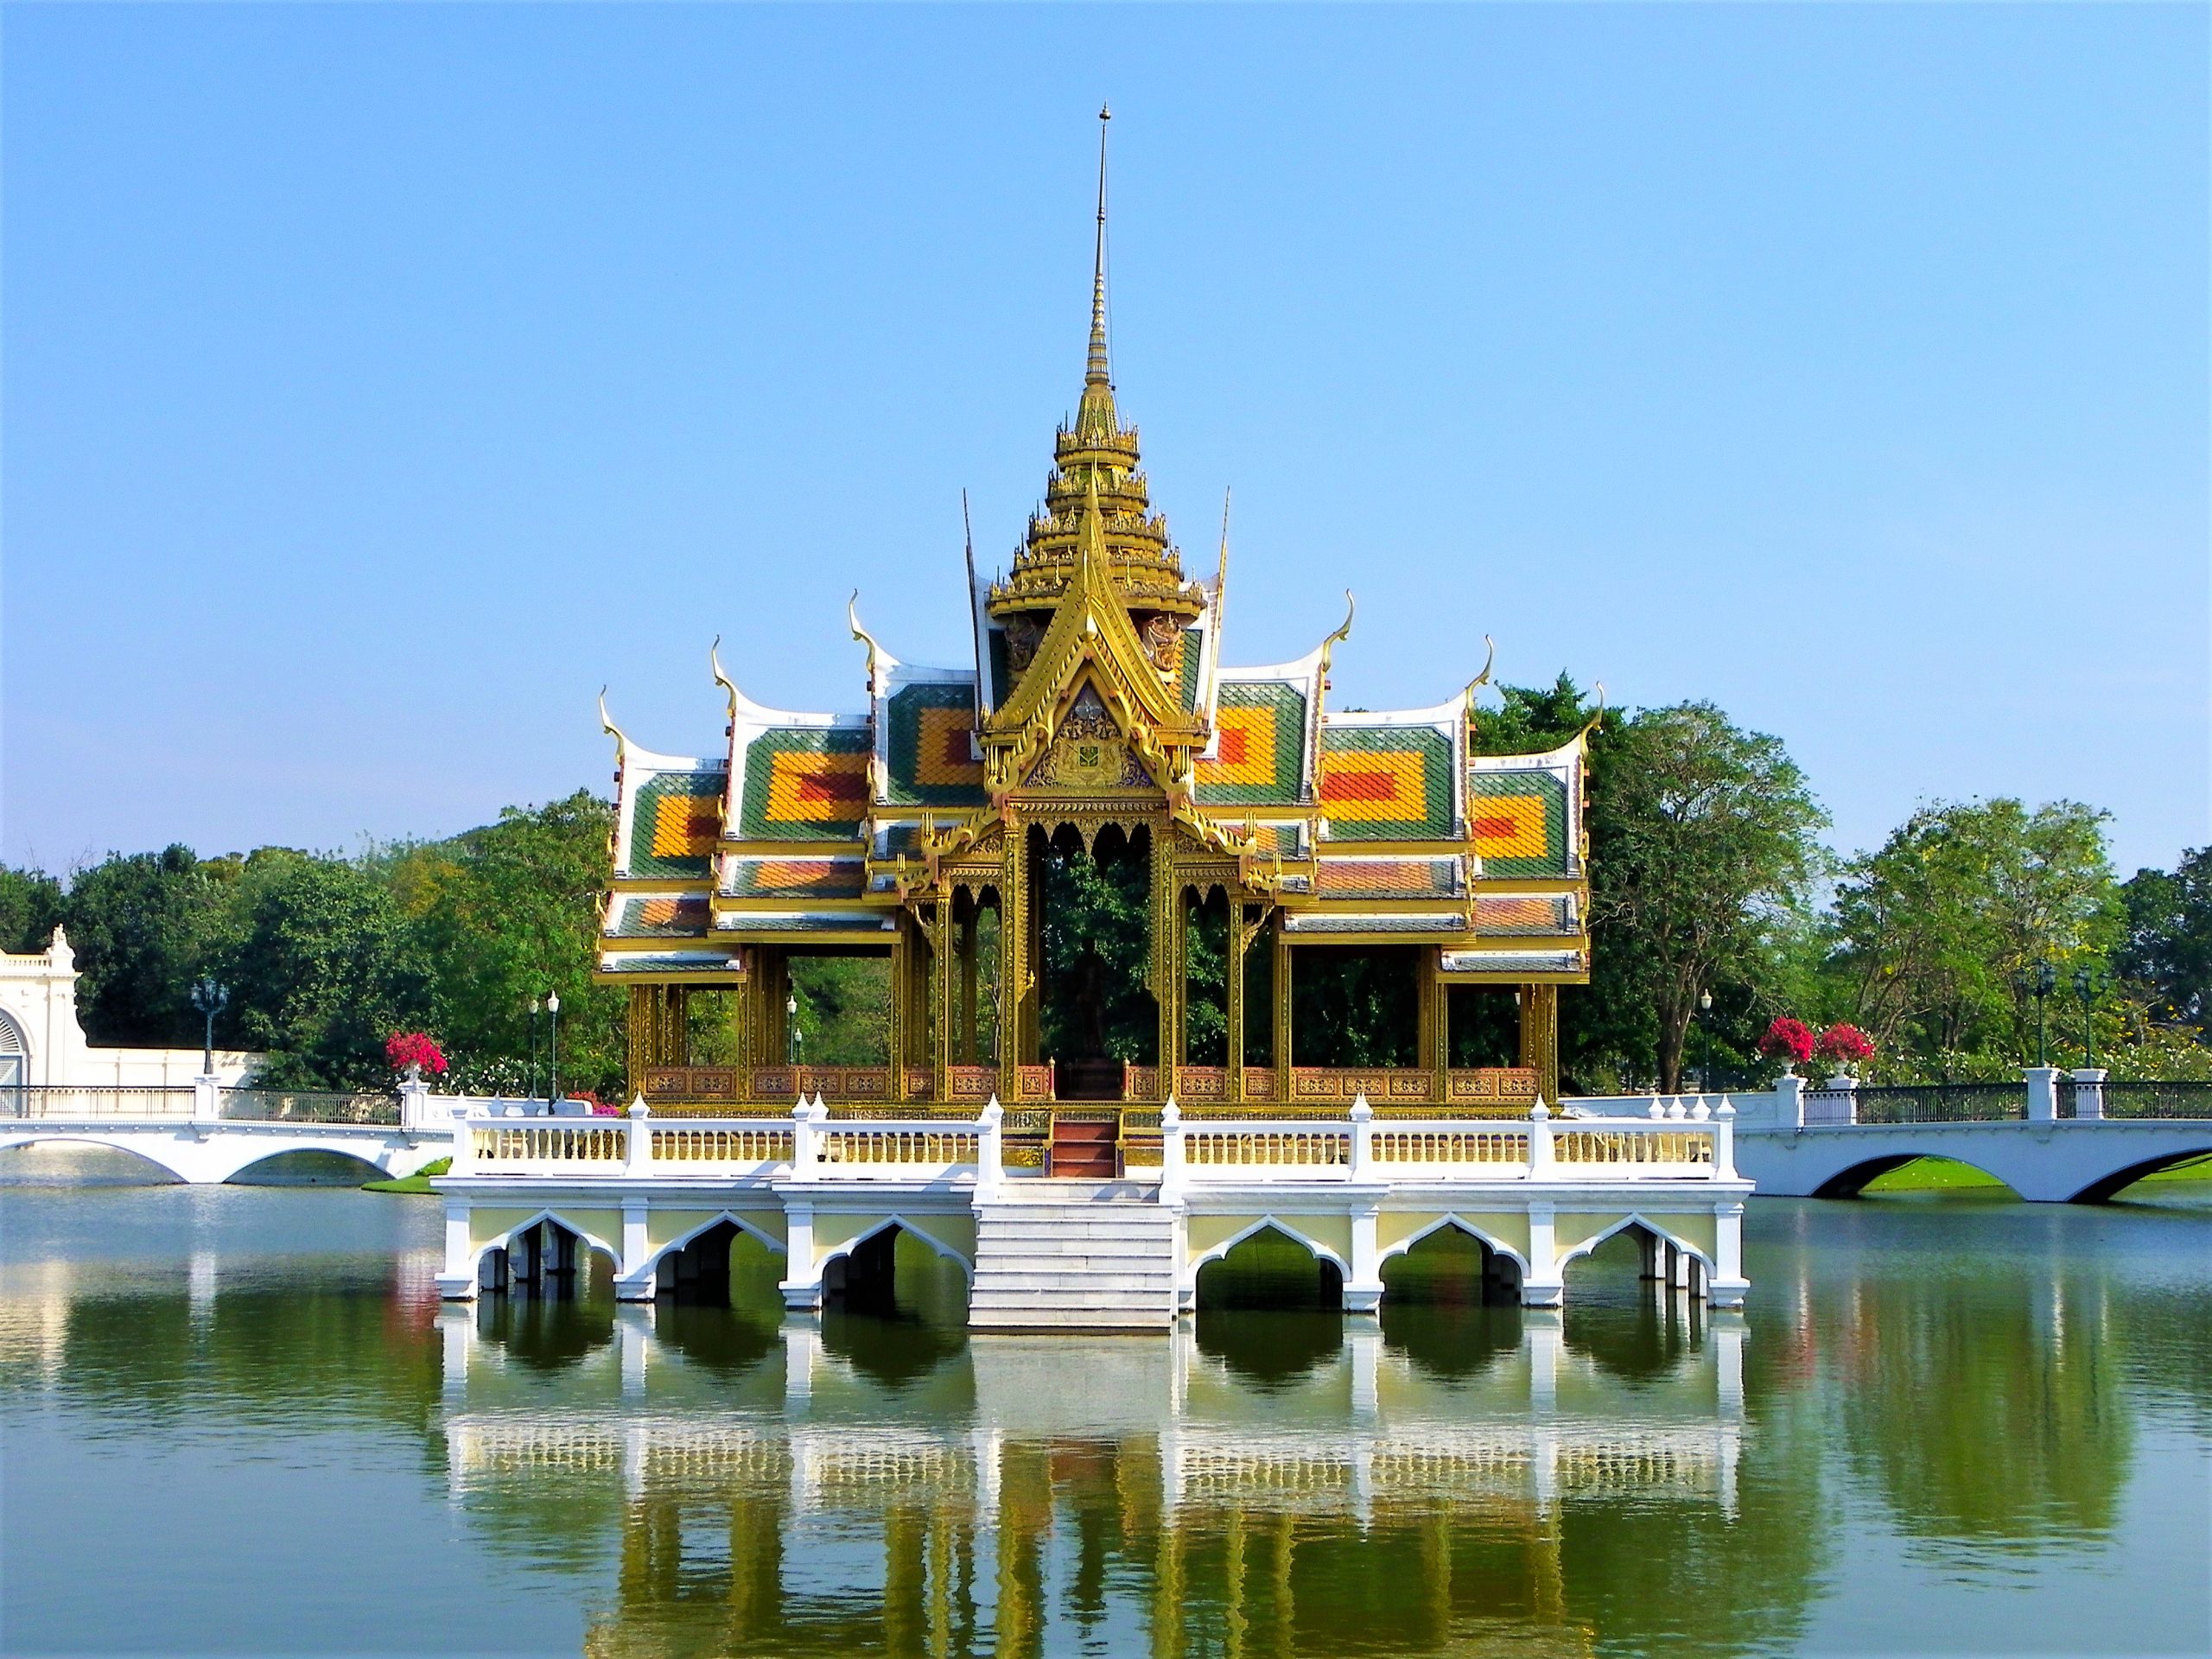 Beautiful temple in front of the water with reflection on the water